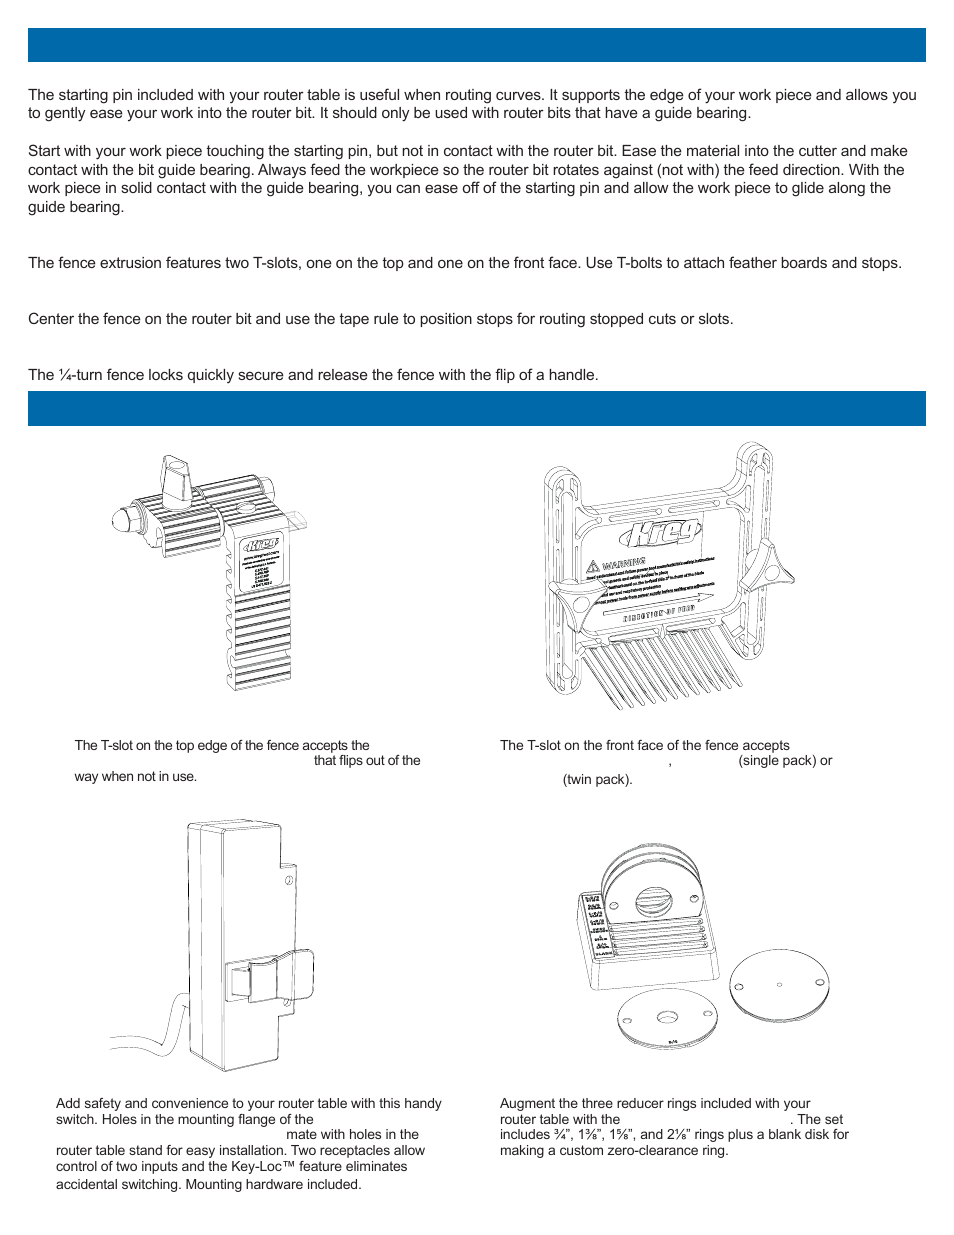 Using your router table, Optional kreg accessories | Kreg PRS2100 Precision Benchtop Router Table User Manual | Page 10 / 28